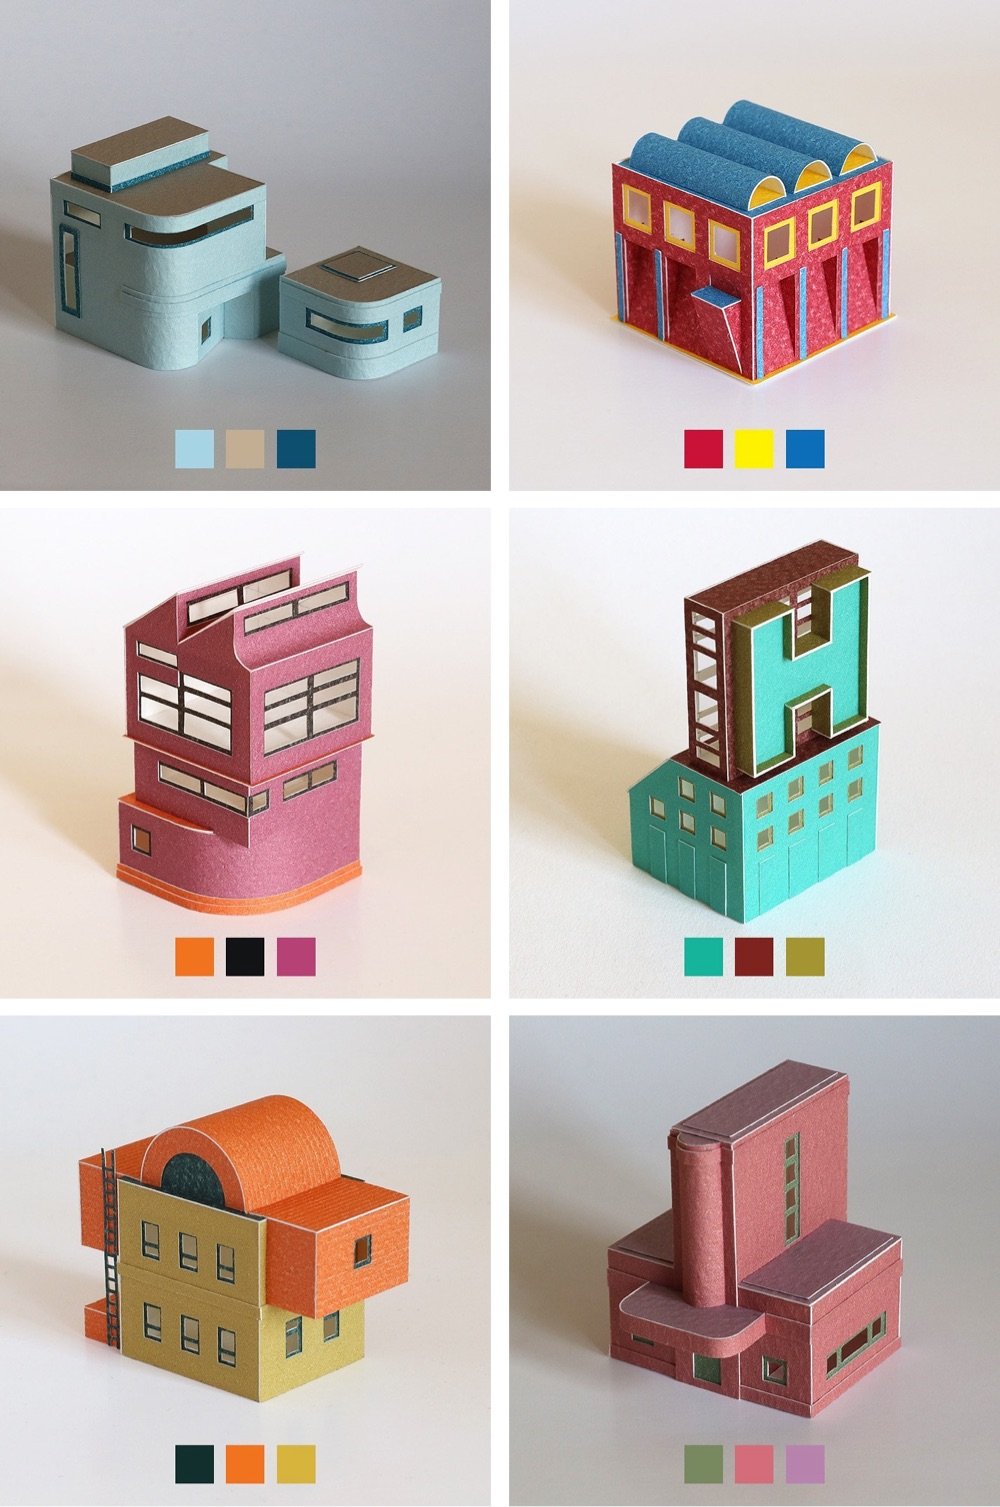 tidy papercraft houses each made using a palette of three to four colors